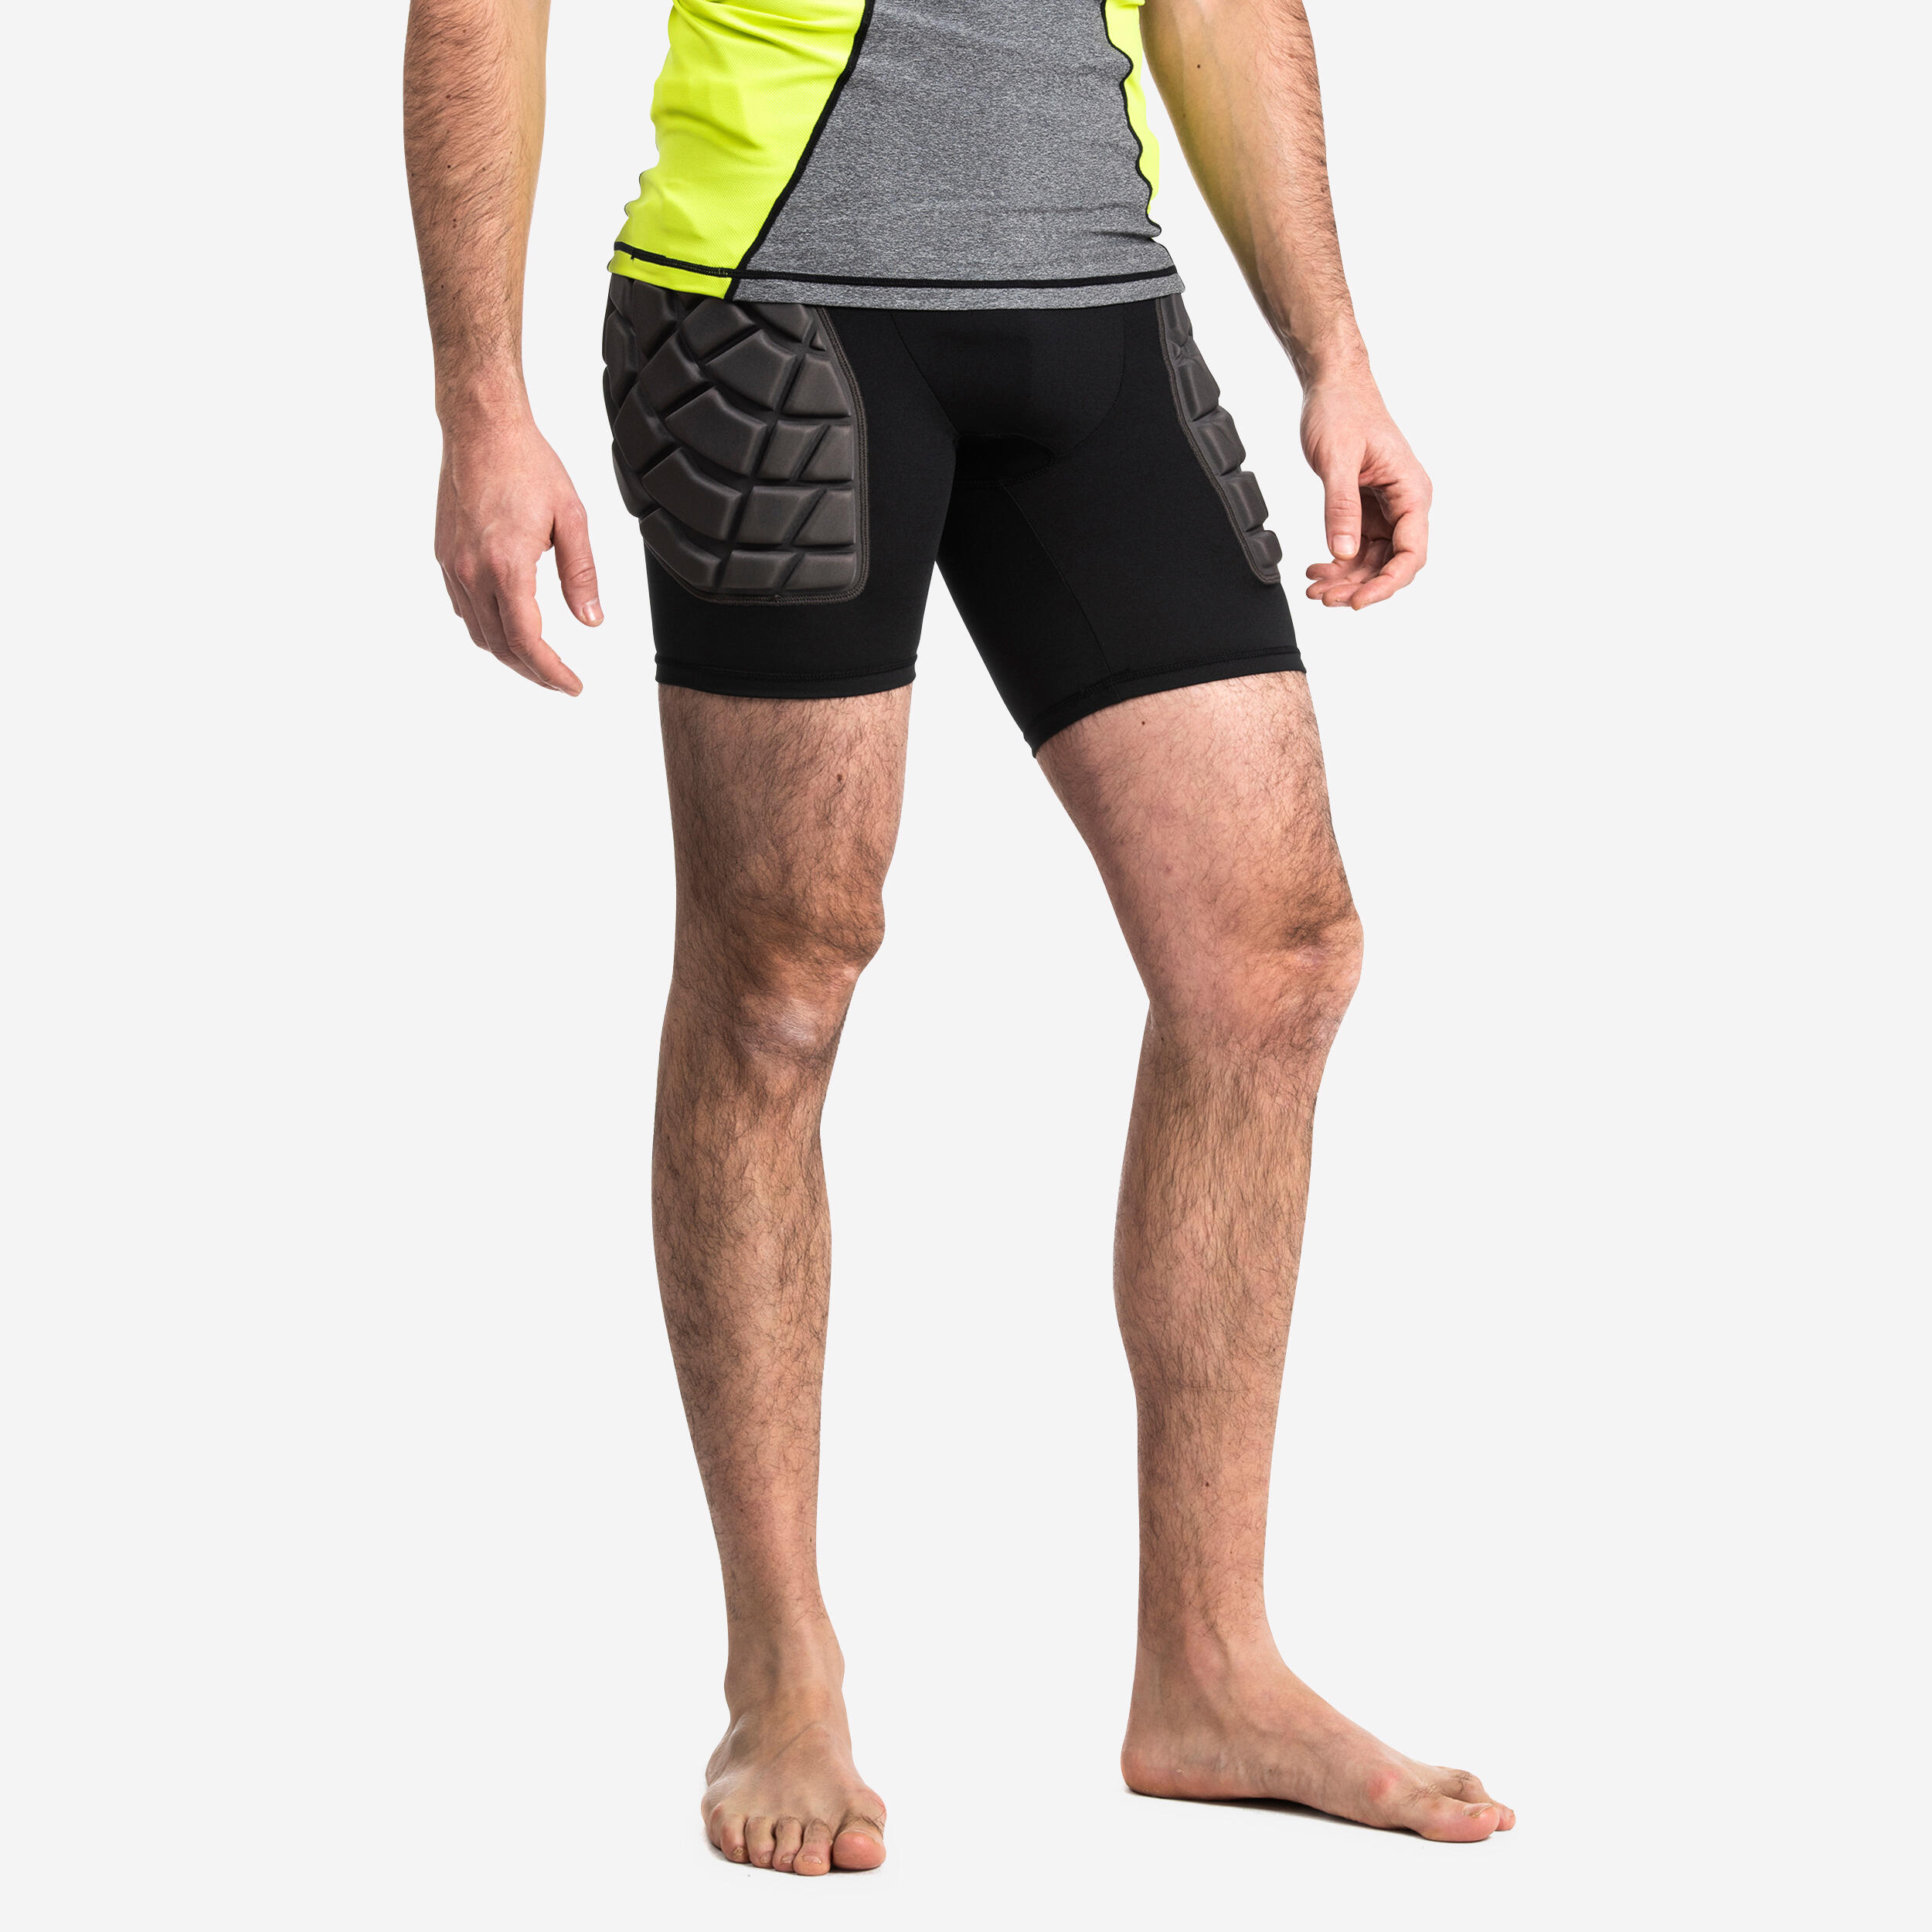 Men's Protective Rugby Undershorts R500 - Black/Yellow 8/9